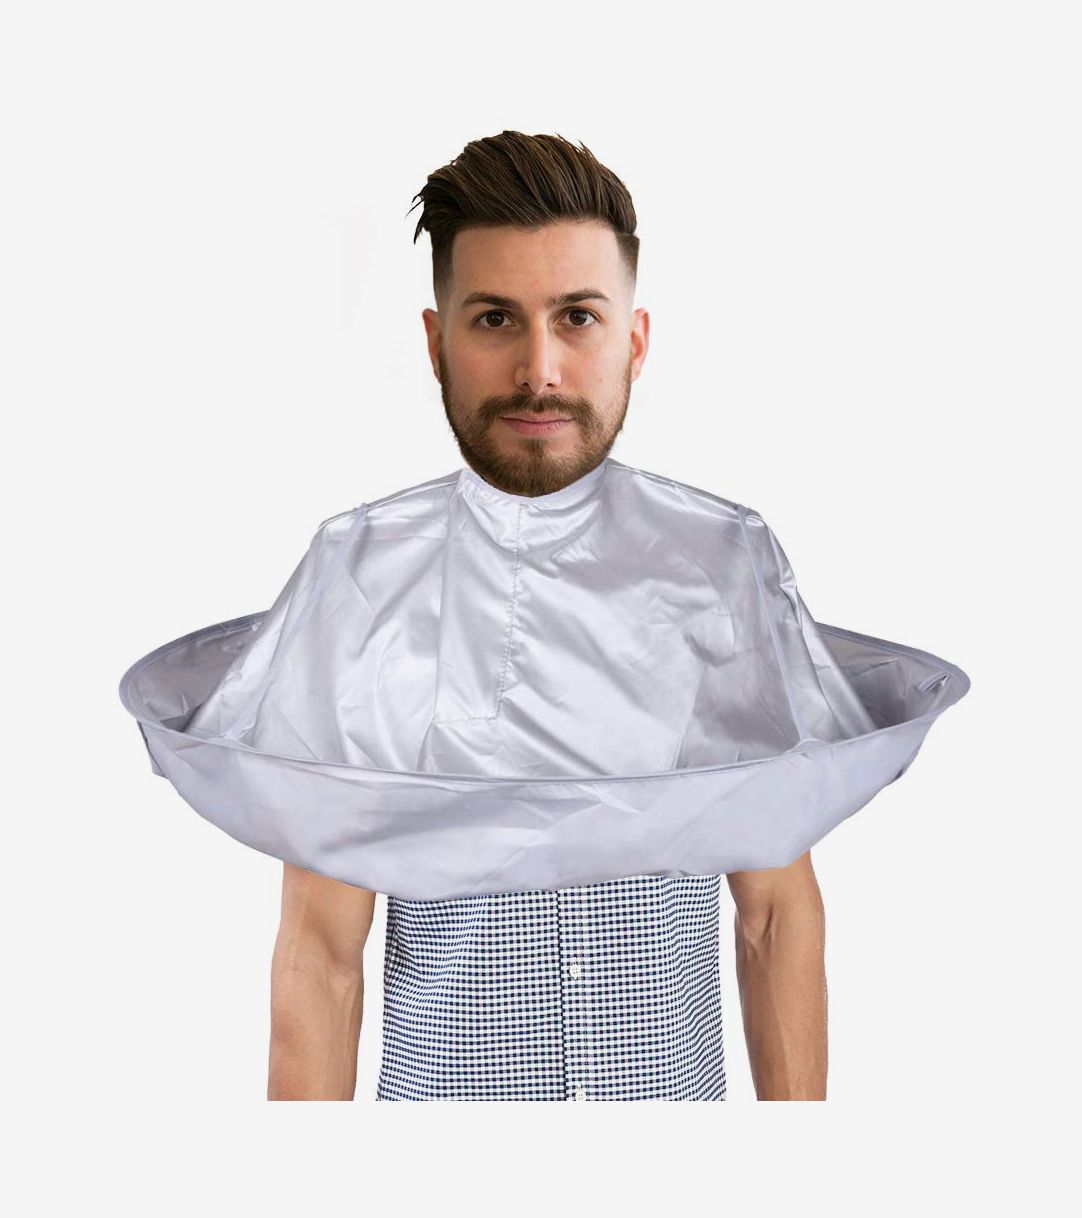 Cricket Contouring Haircutting Cape - White